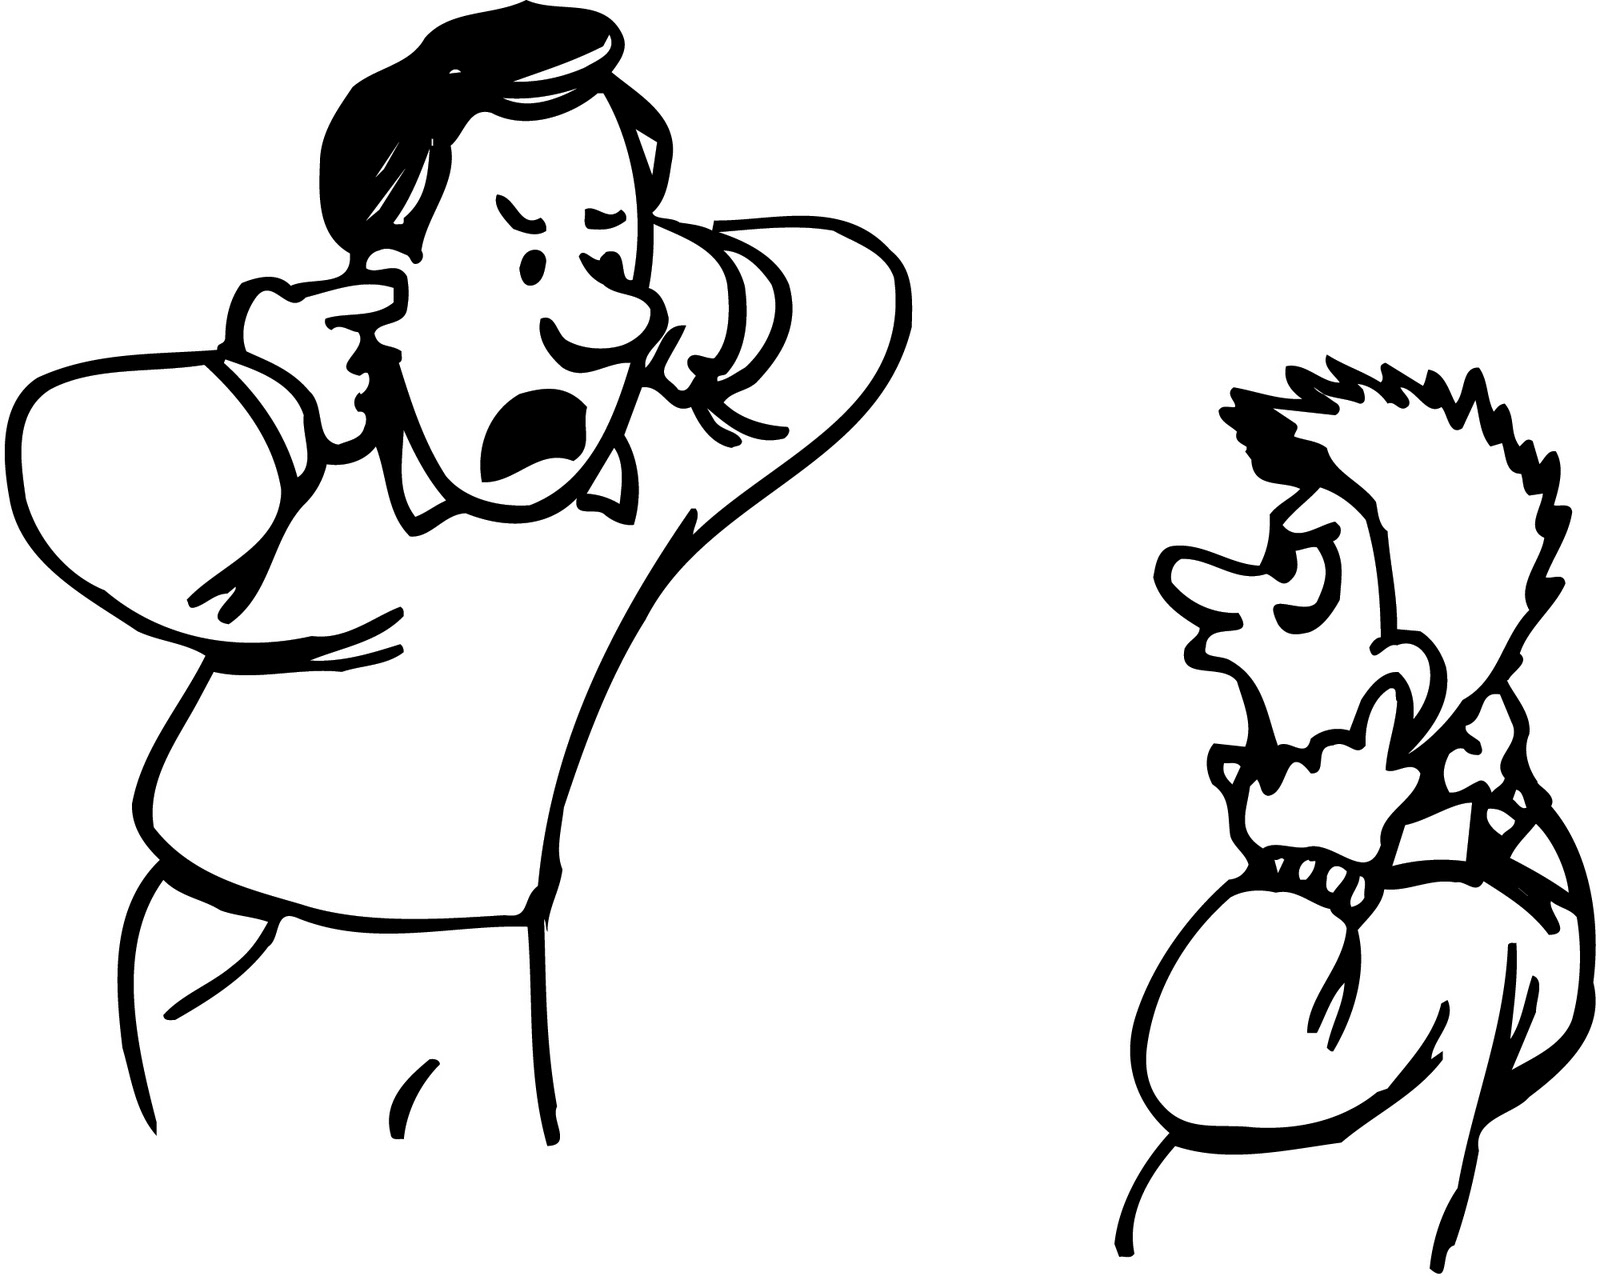 Drawings Of People Fighting   Clipart Best